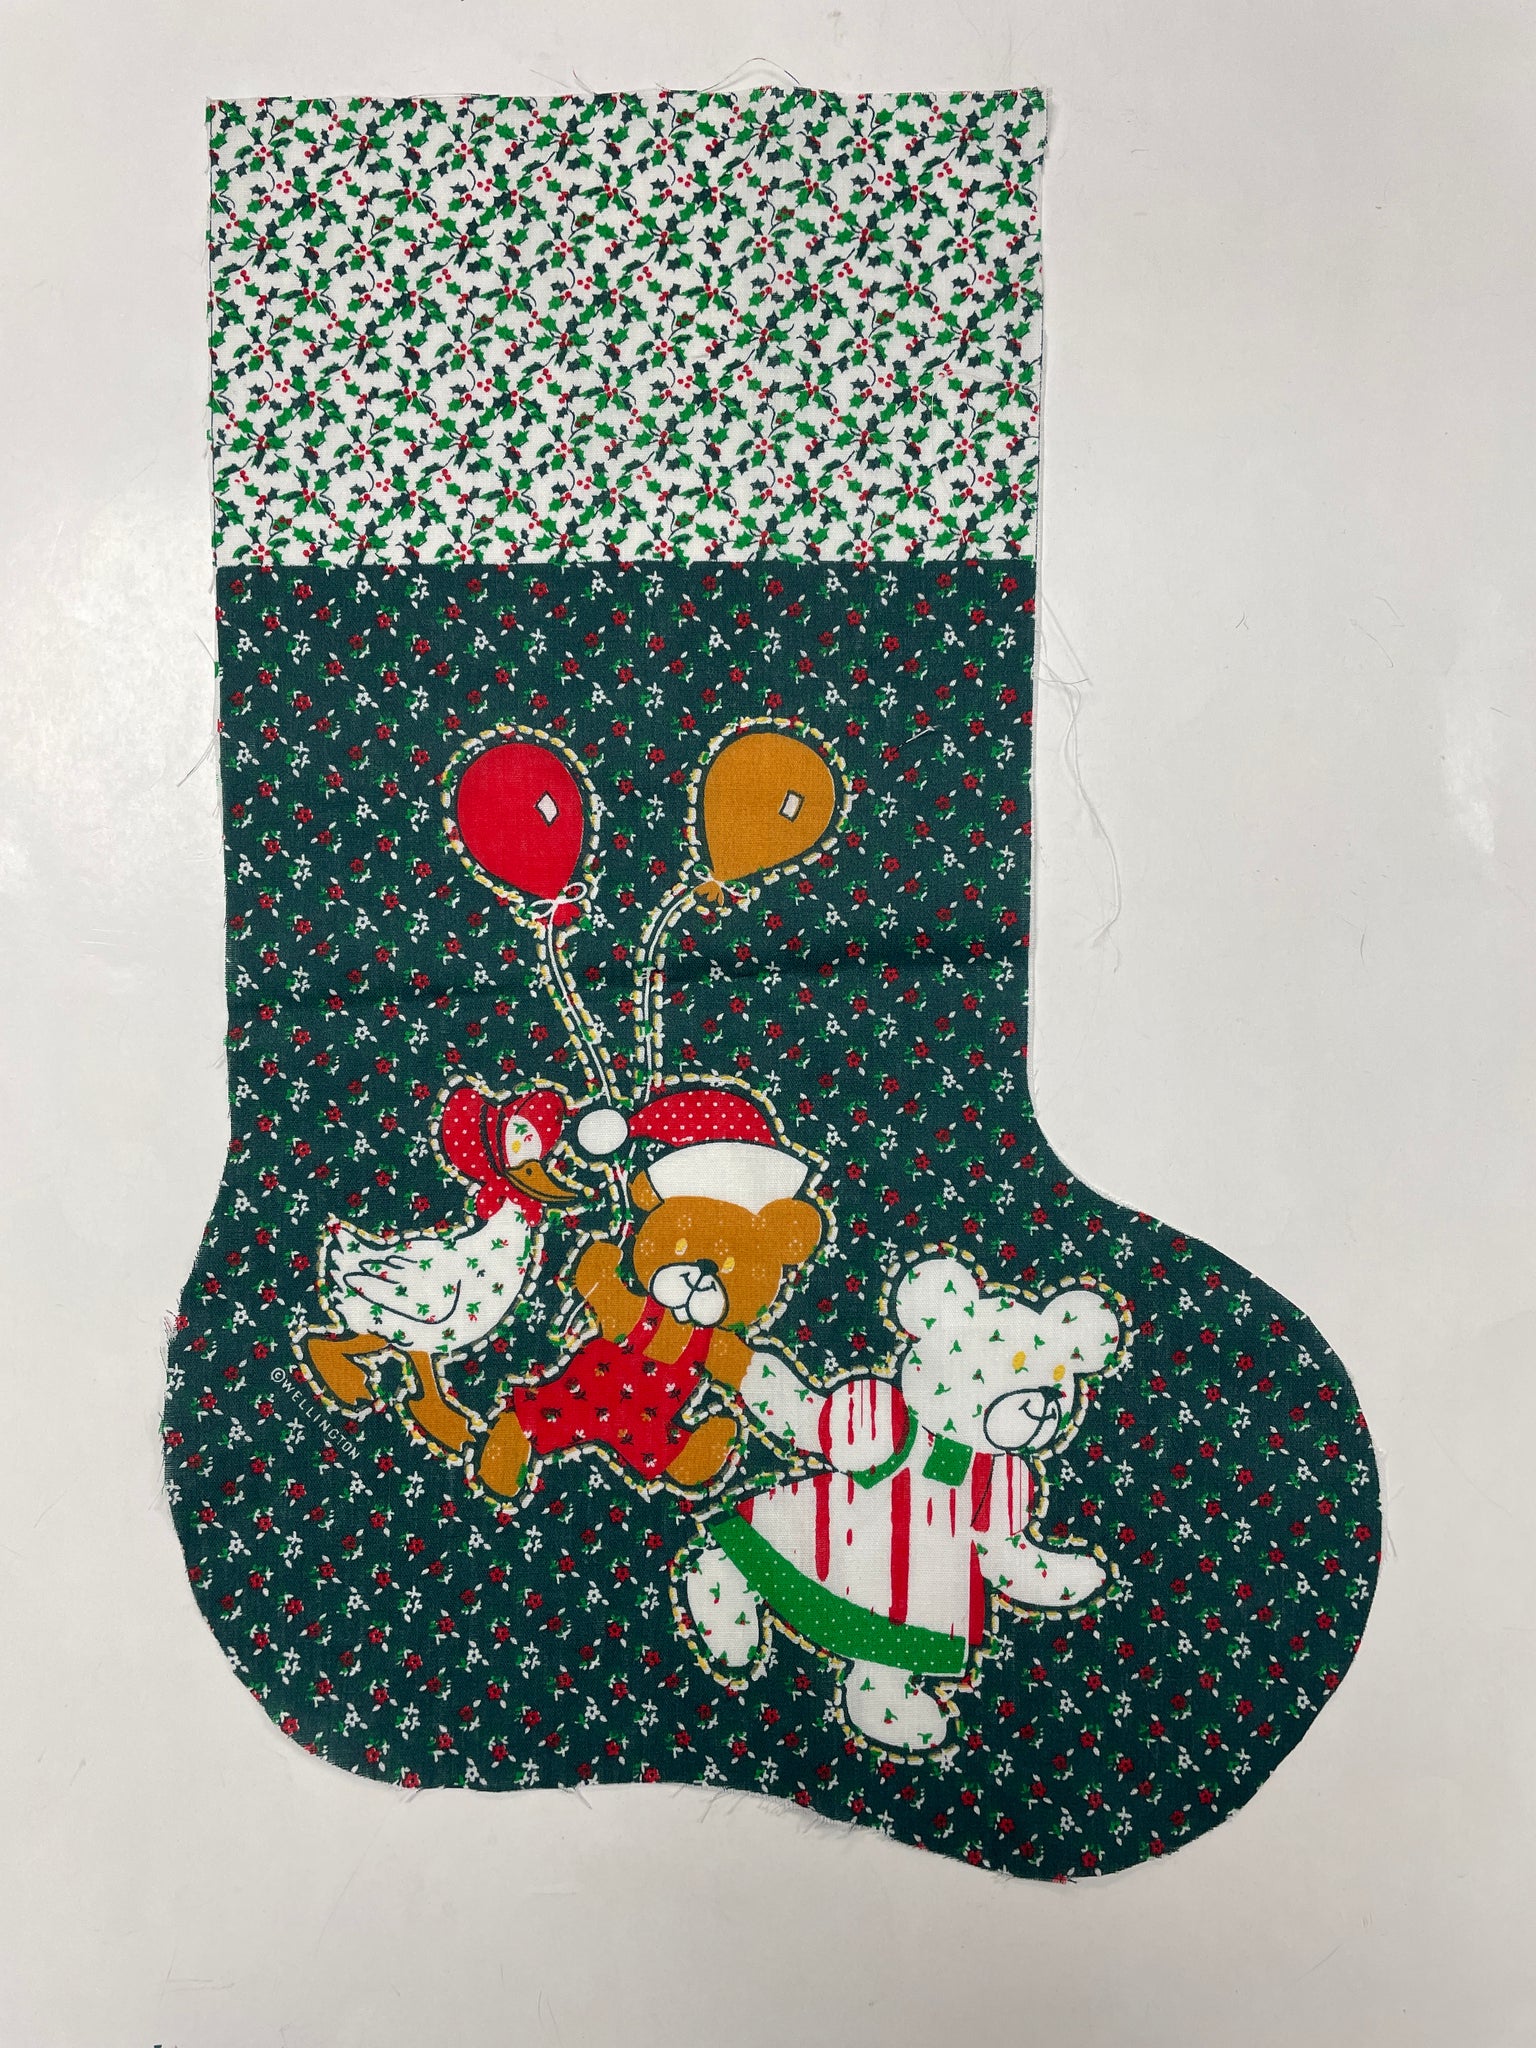 Poly/Cotton Christmas Stocking Panel Vintage - Green Calico With Teddy Bears with Goose